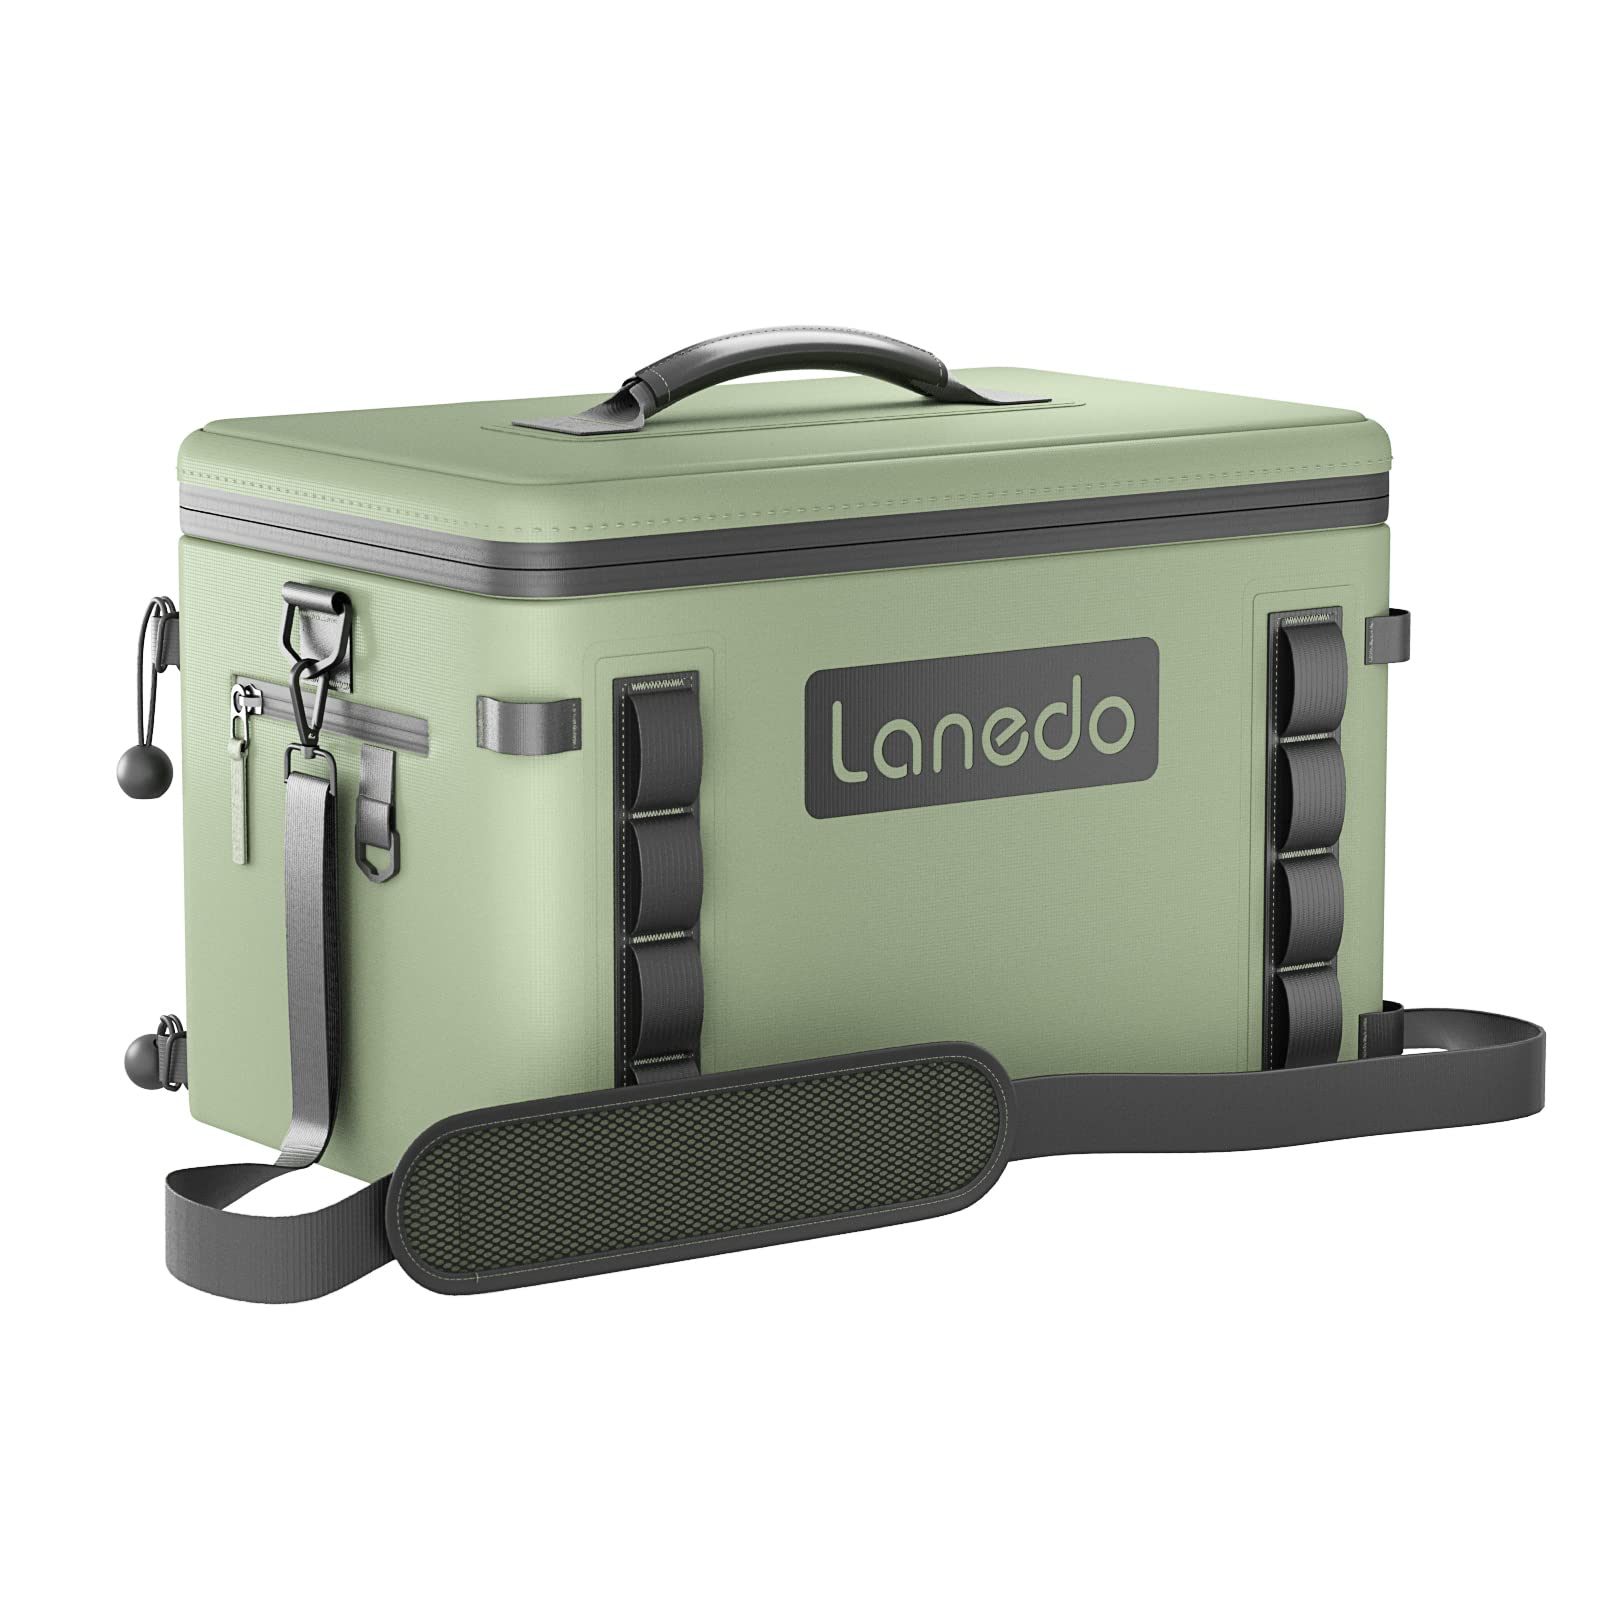 Lanedo Soft Cooler 36 Can Insulated Bag Portable Ice Chest Box for Lunch Beach Drink Beverage Travel Camping Picnic C